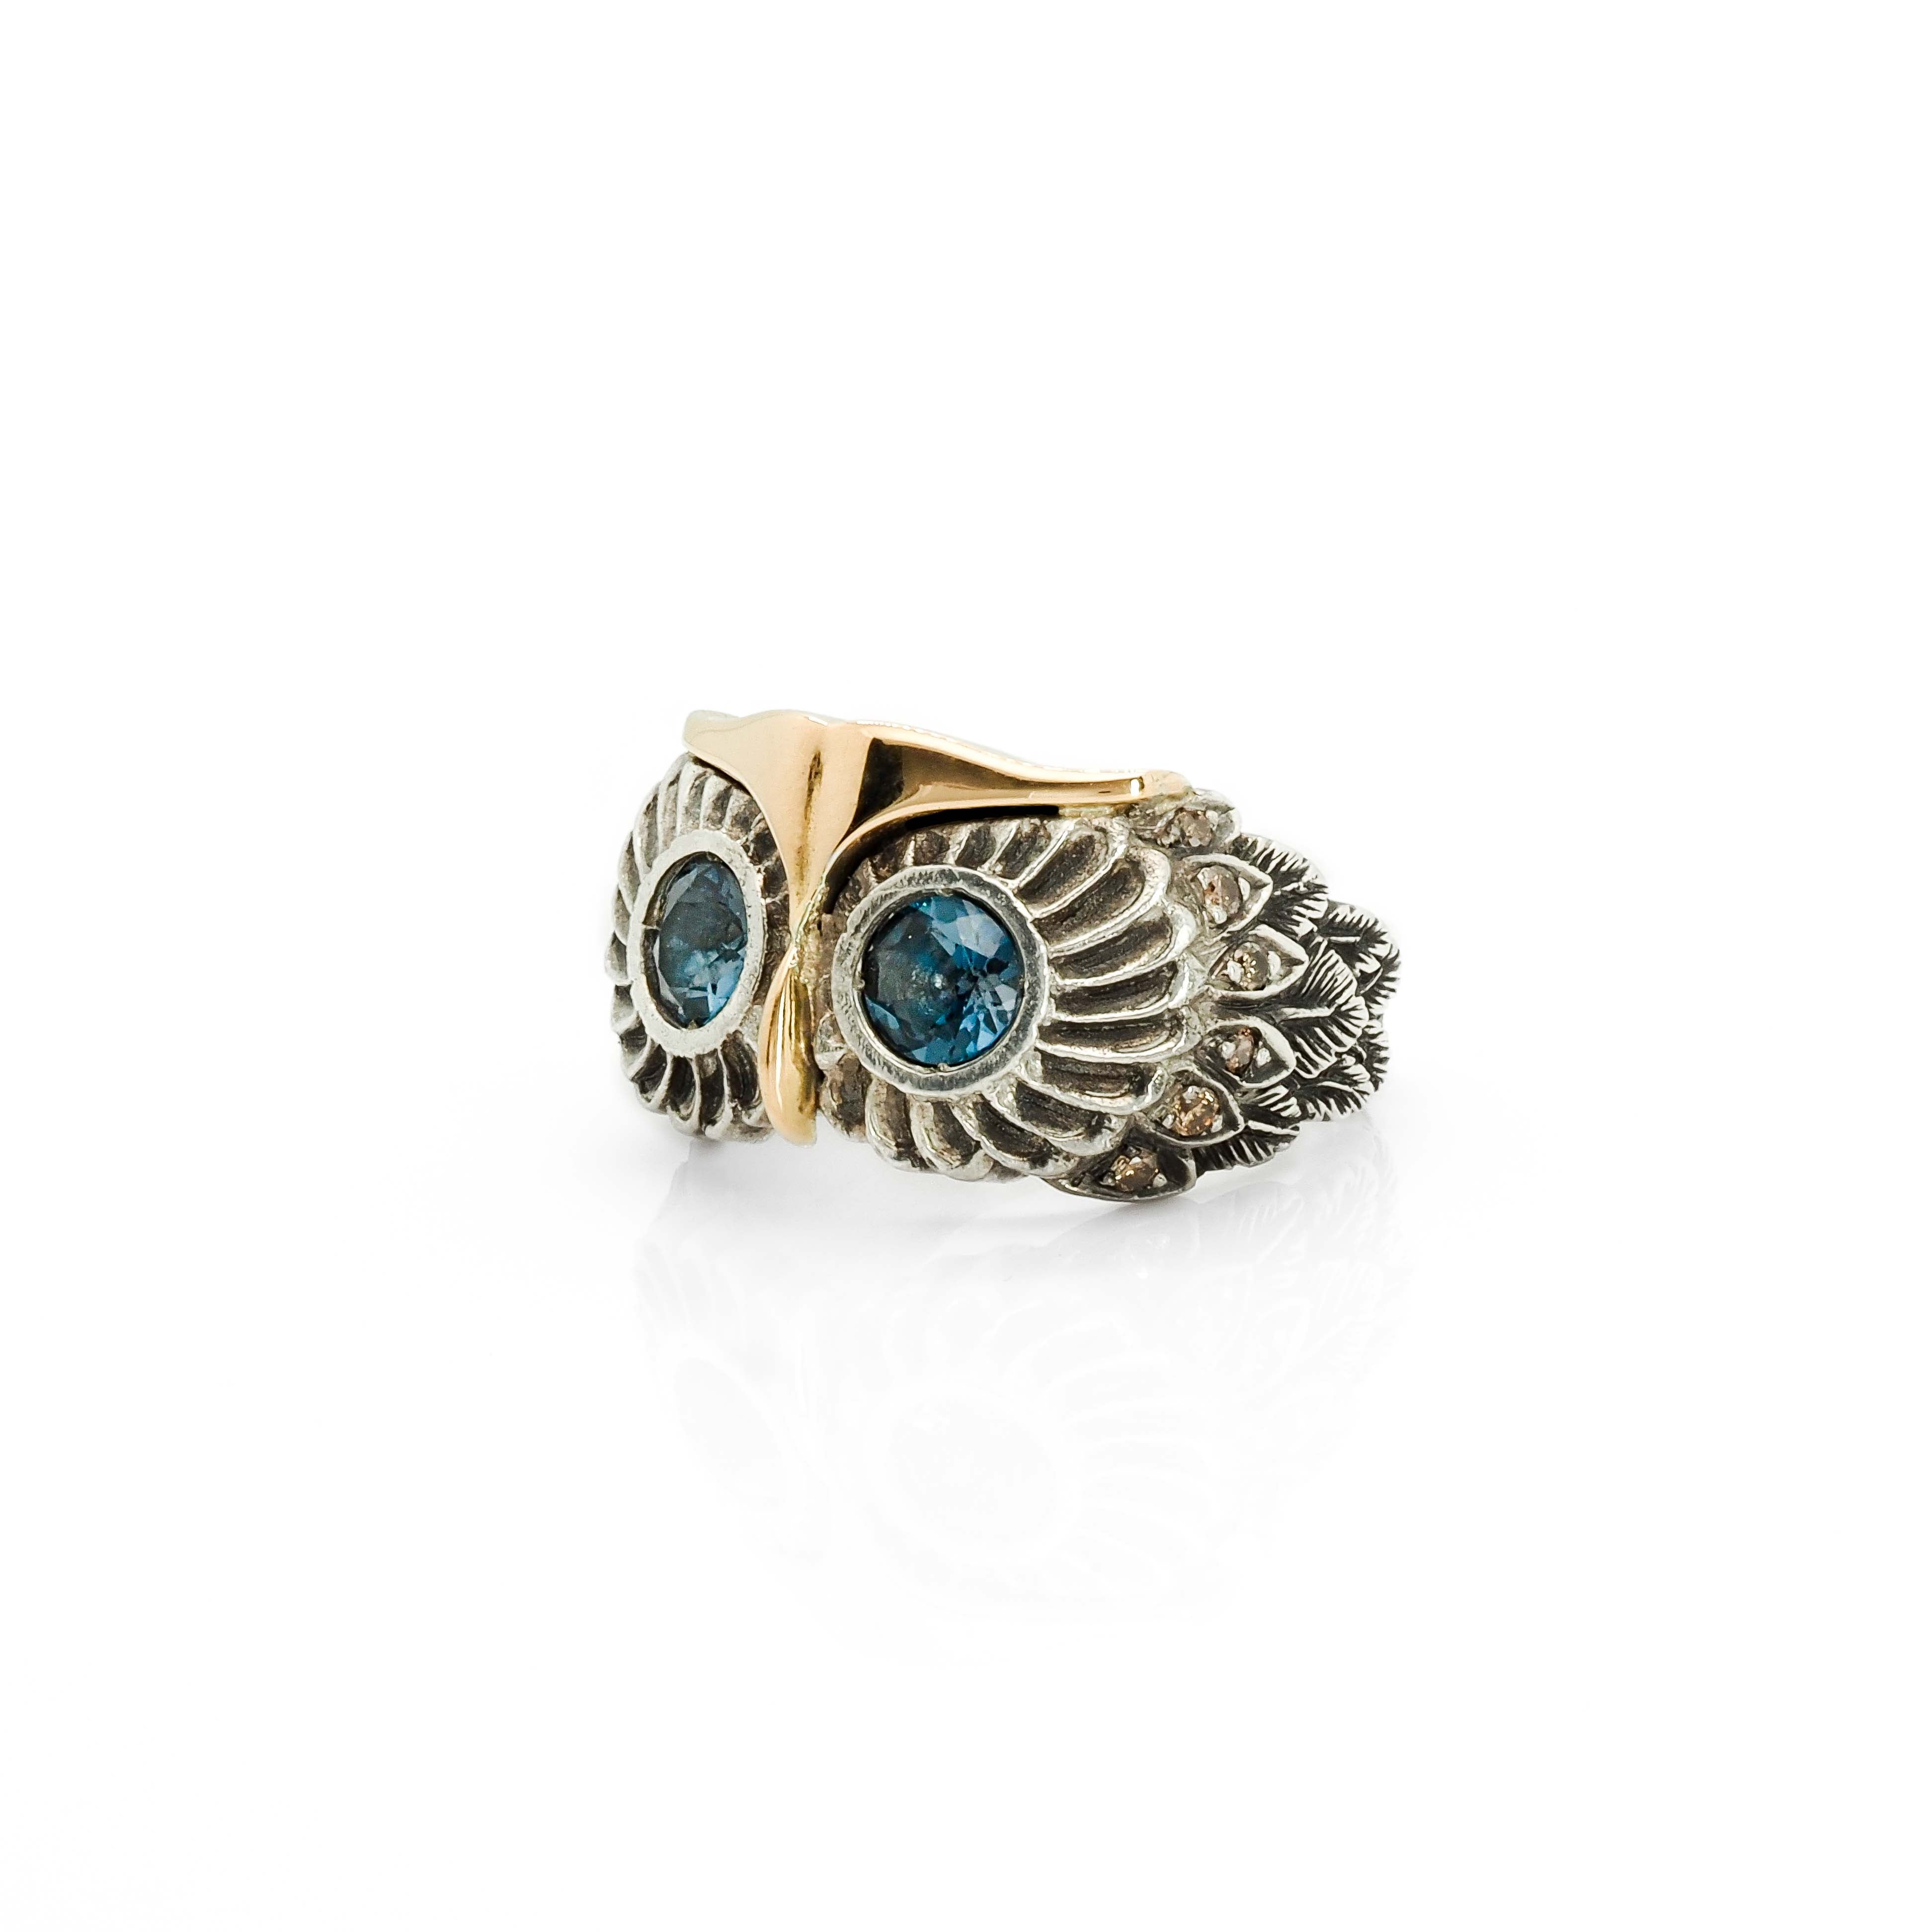 Taru Jewelry charming owl ring is a unique piece crafted from 18K gold and sterling silver, featuring a design that captures the essence of the wise and mysterious bird. The owl is a symbol of wisdom, known for its sharp vision and hearing. It is also believed to be a protector and messenger of secrets. The ring features London blue topaz as the owl's eyes, which represents loyalty and righteousness, and brown diamonds for the feathers. It is said to help improve communication and finding success.